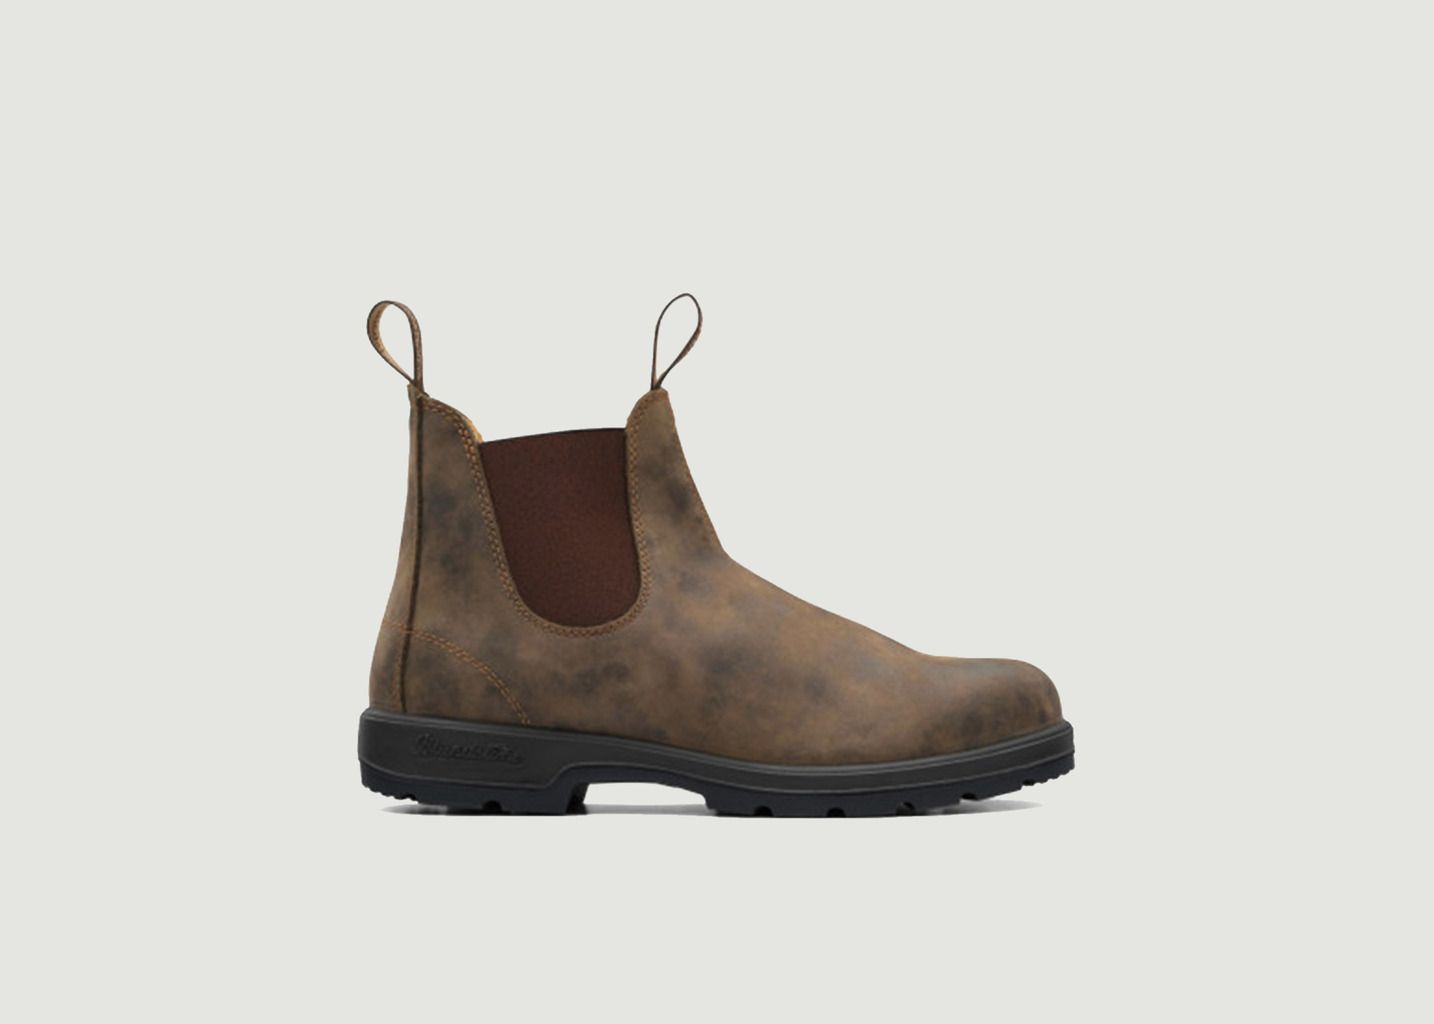 Blundstone Classic Chelsea Boots